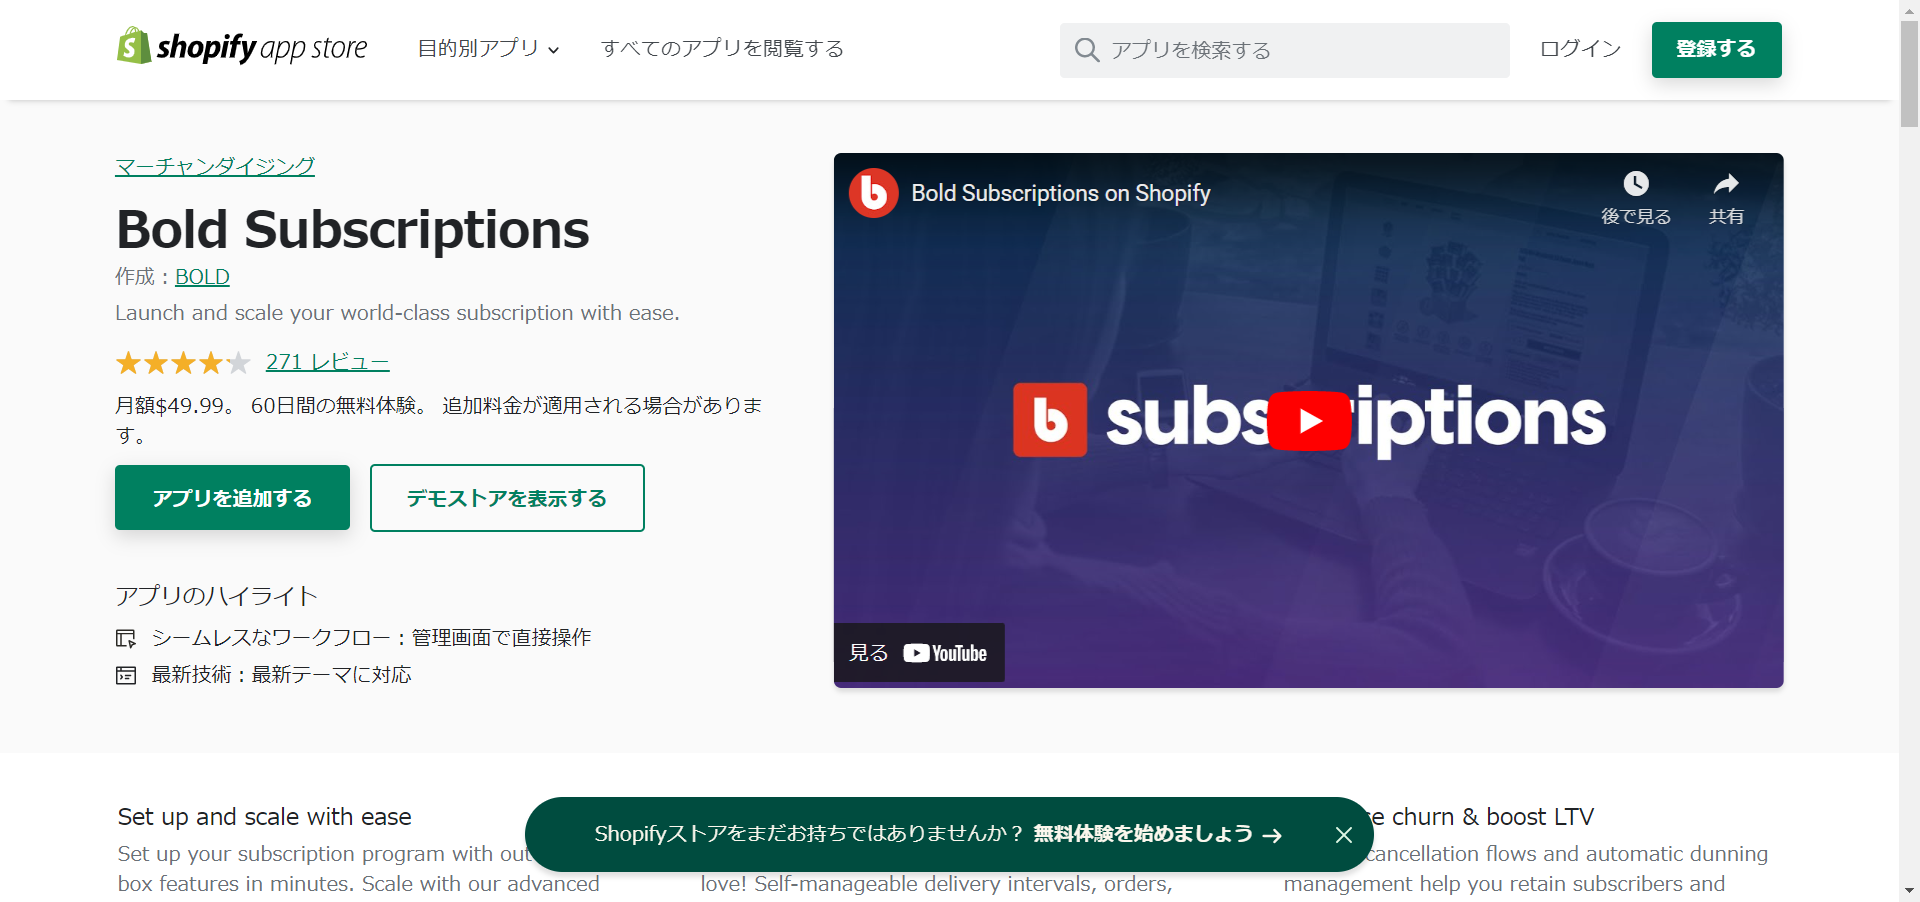 Bold-Subscriptions